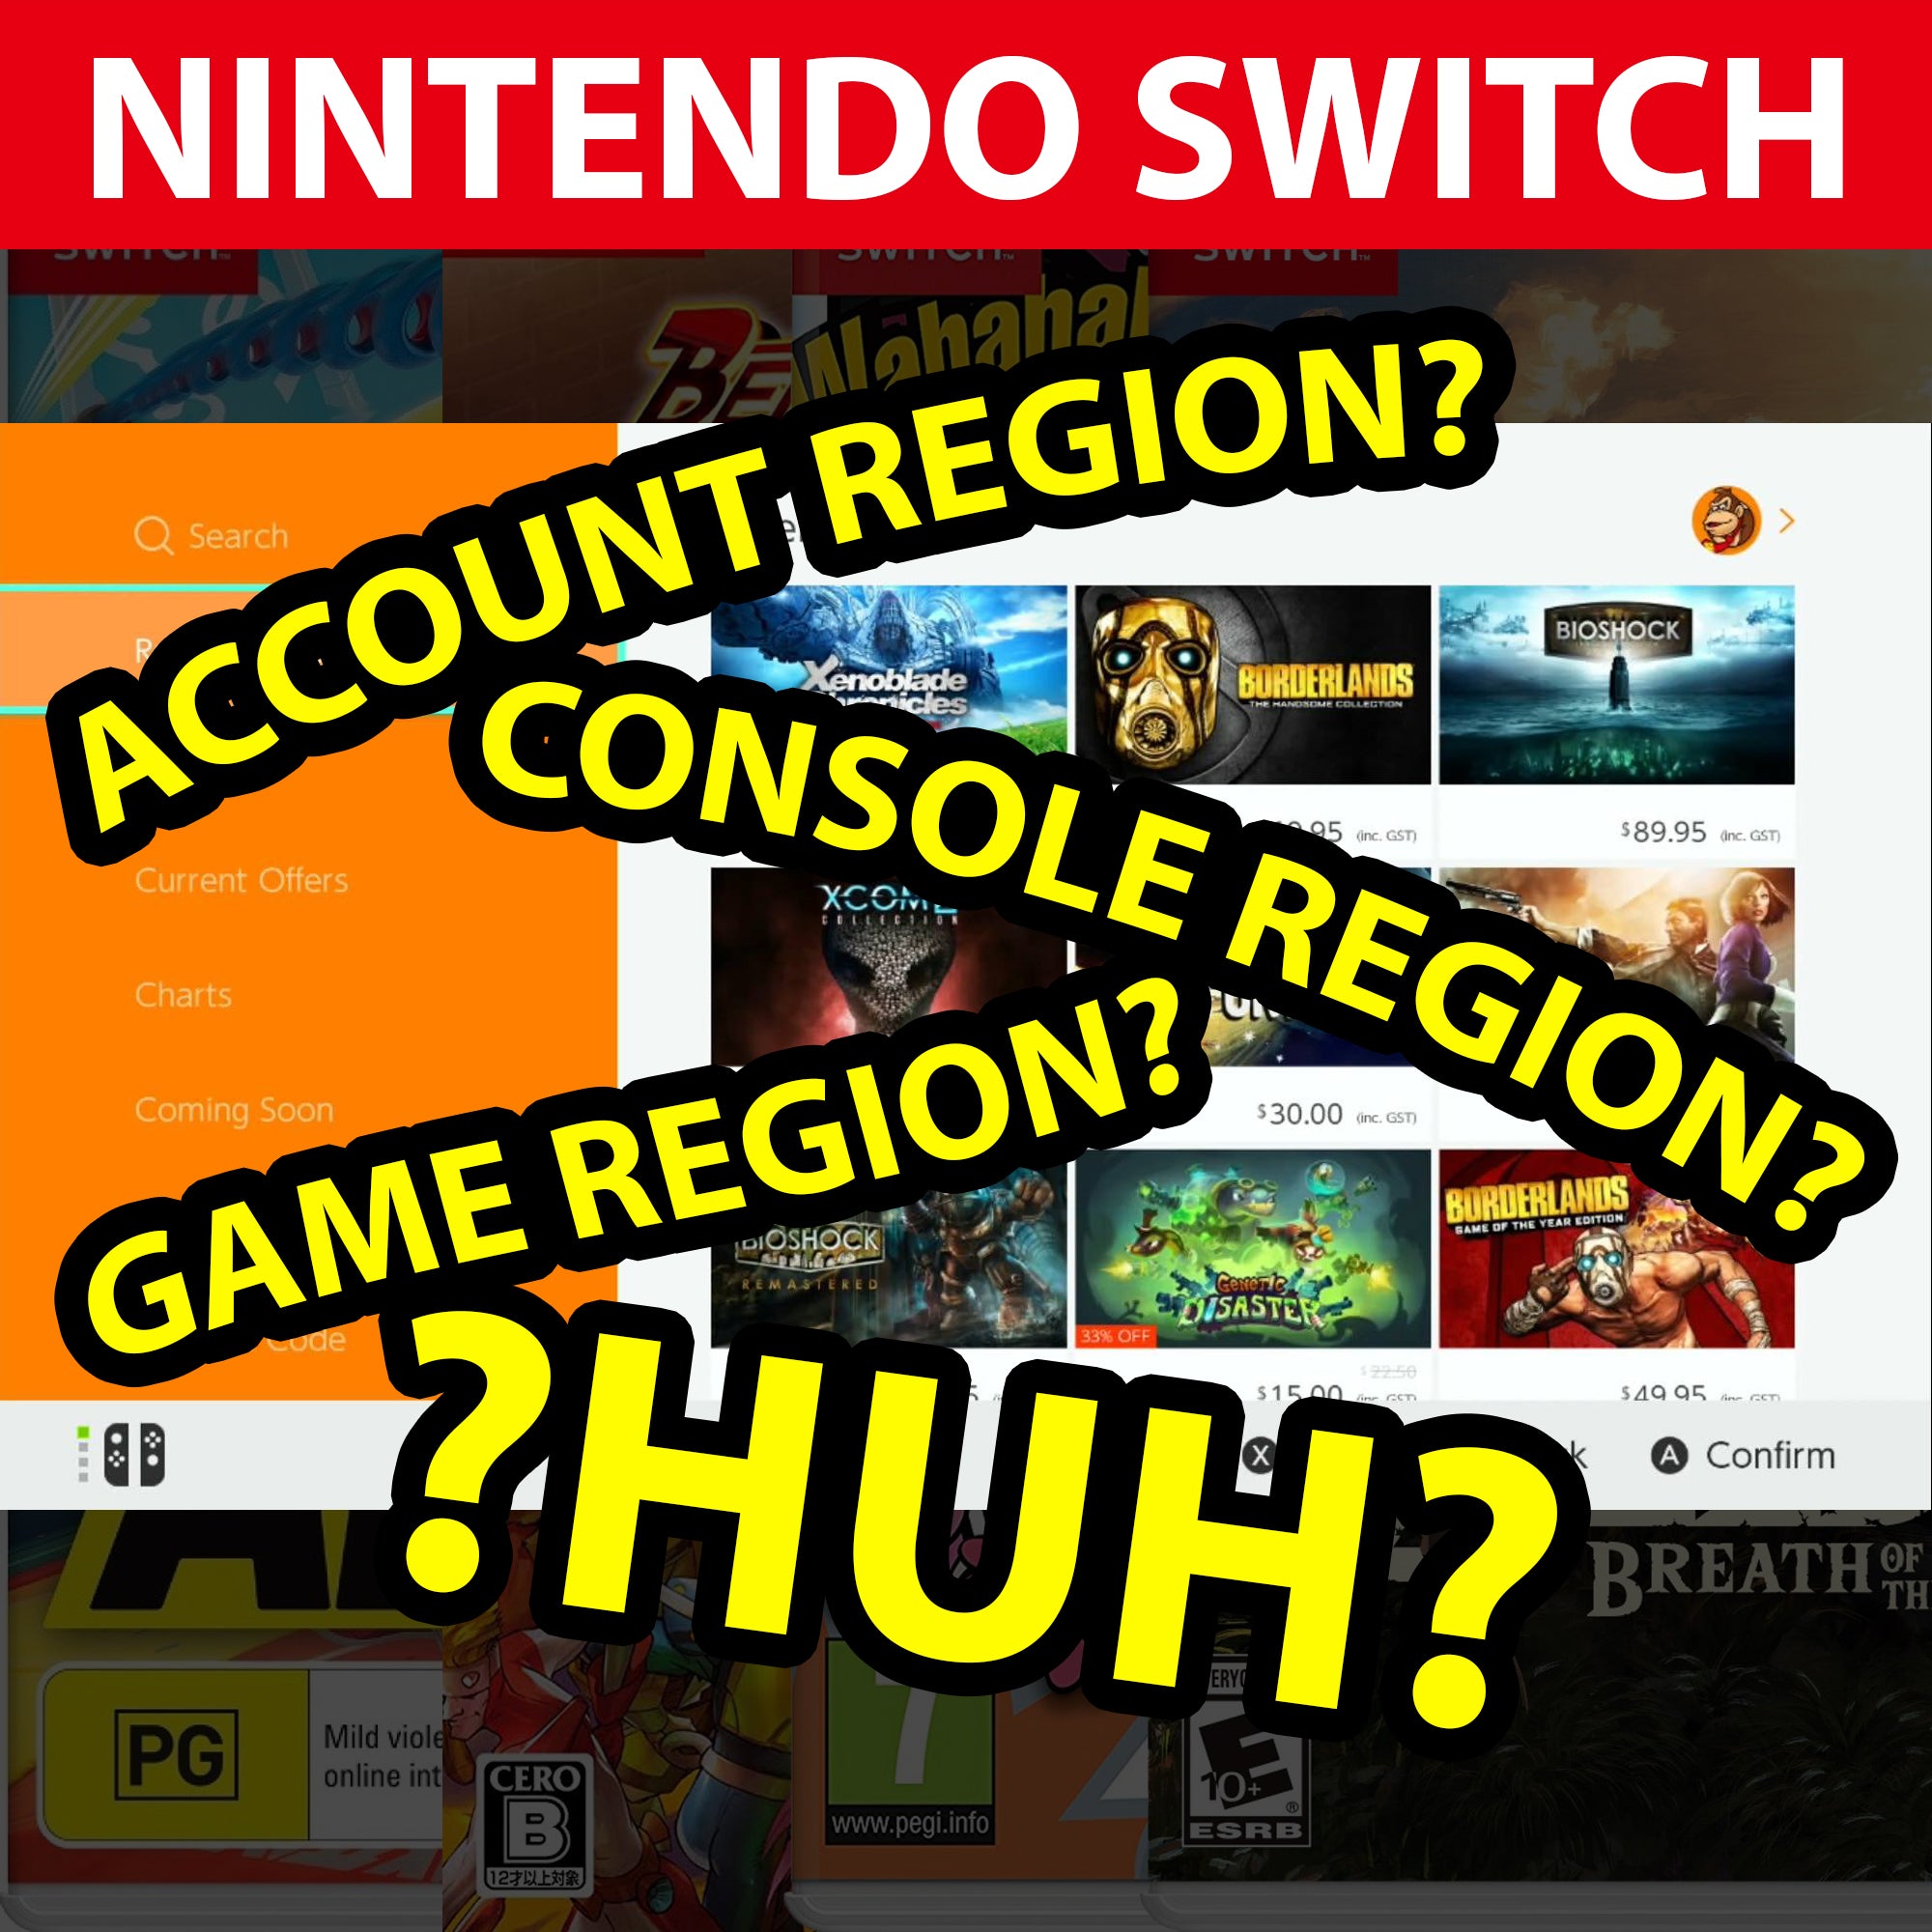 How to Fix Nintendo eShop is Not Currently Available in Your